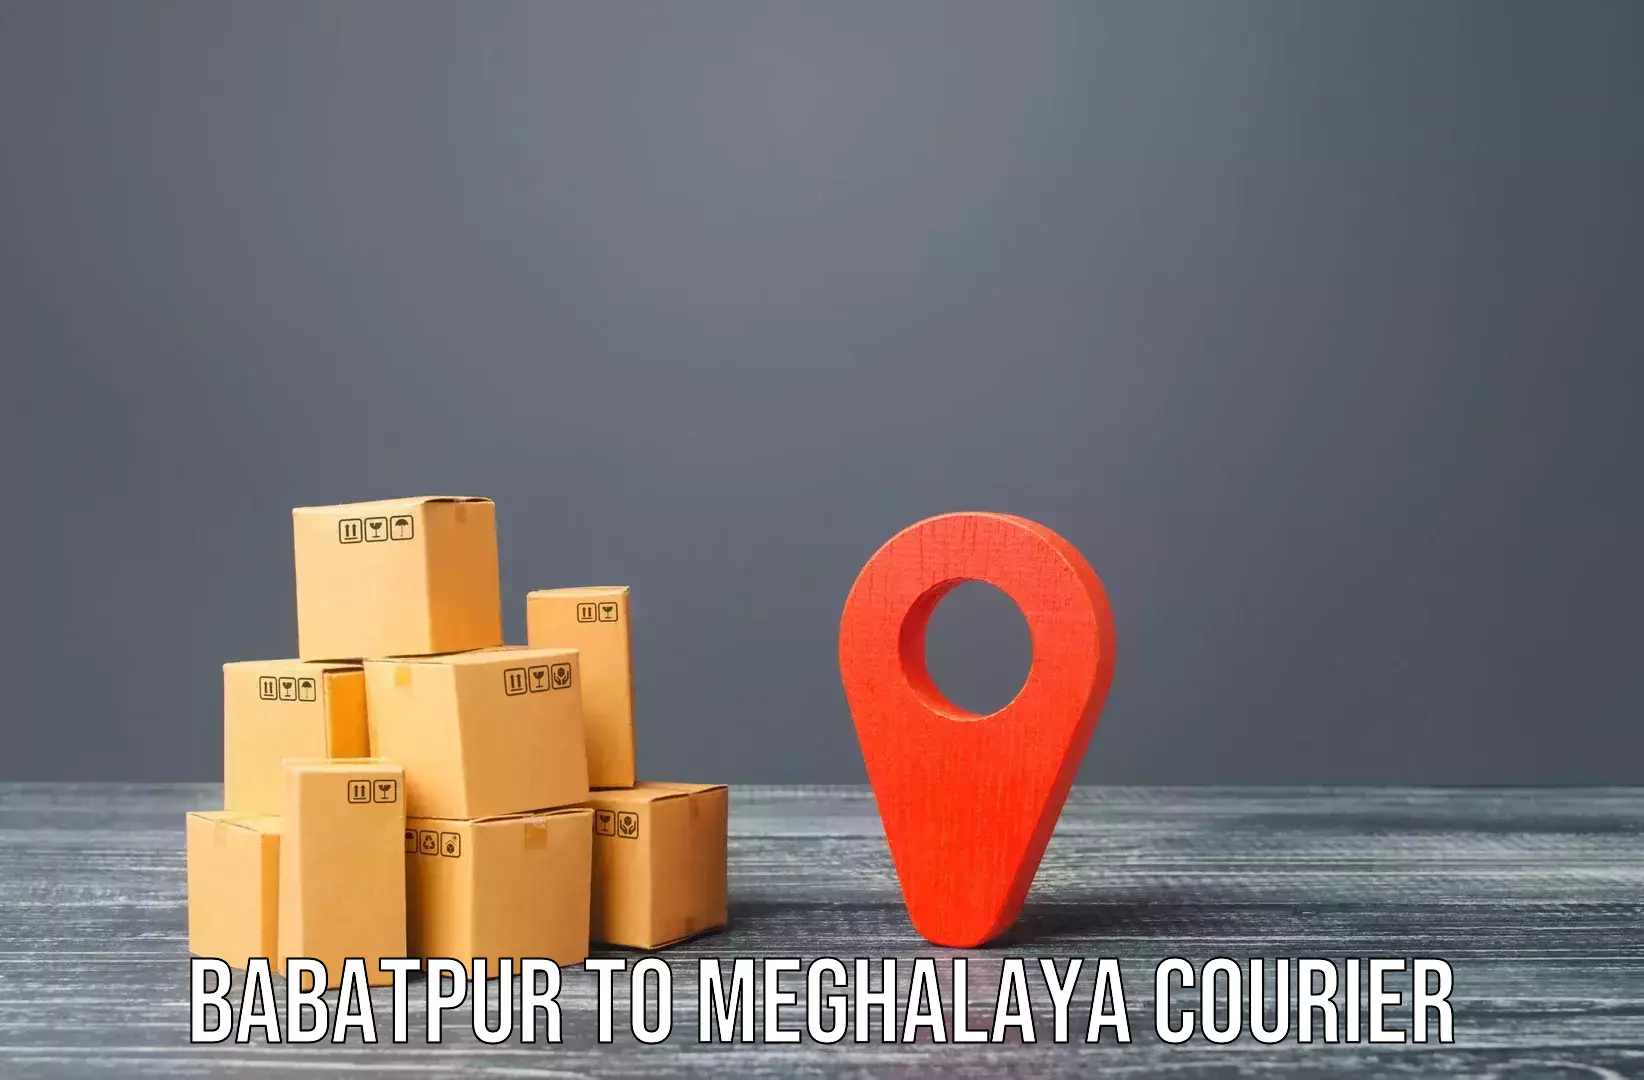 Cost-effective moving options Babatpur to Shillong